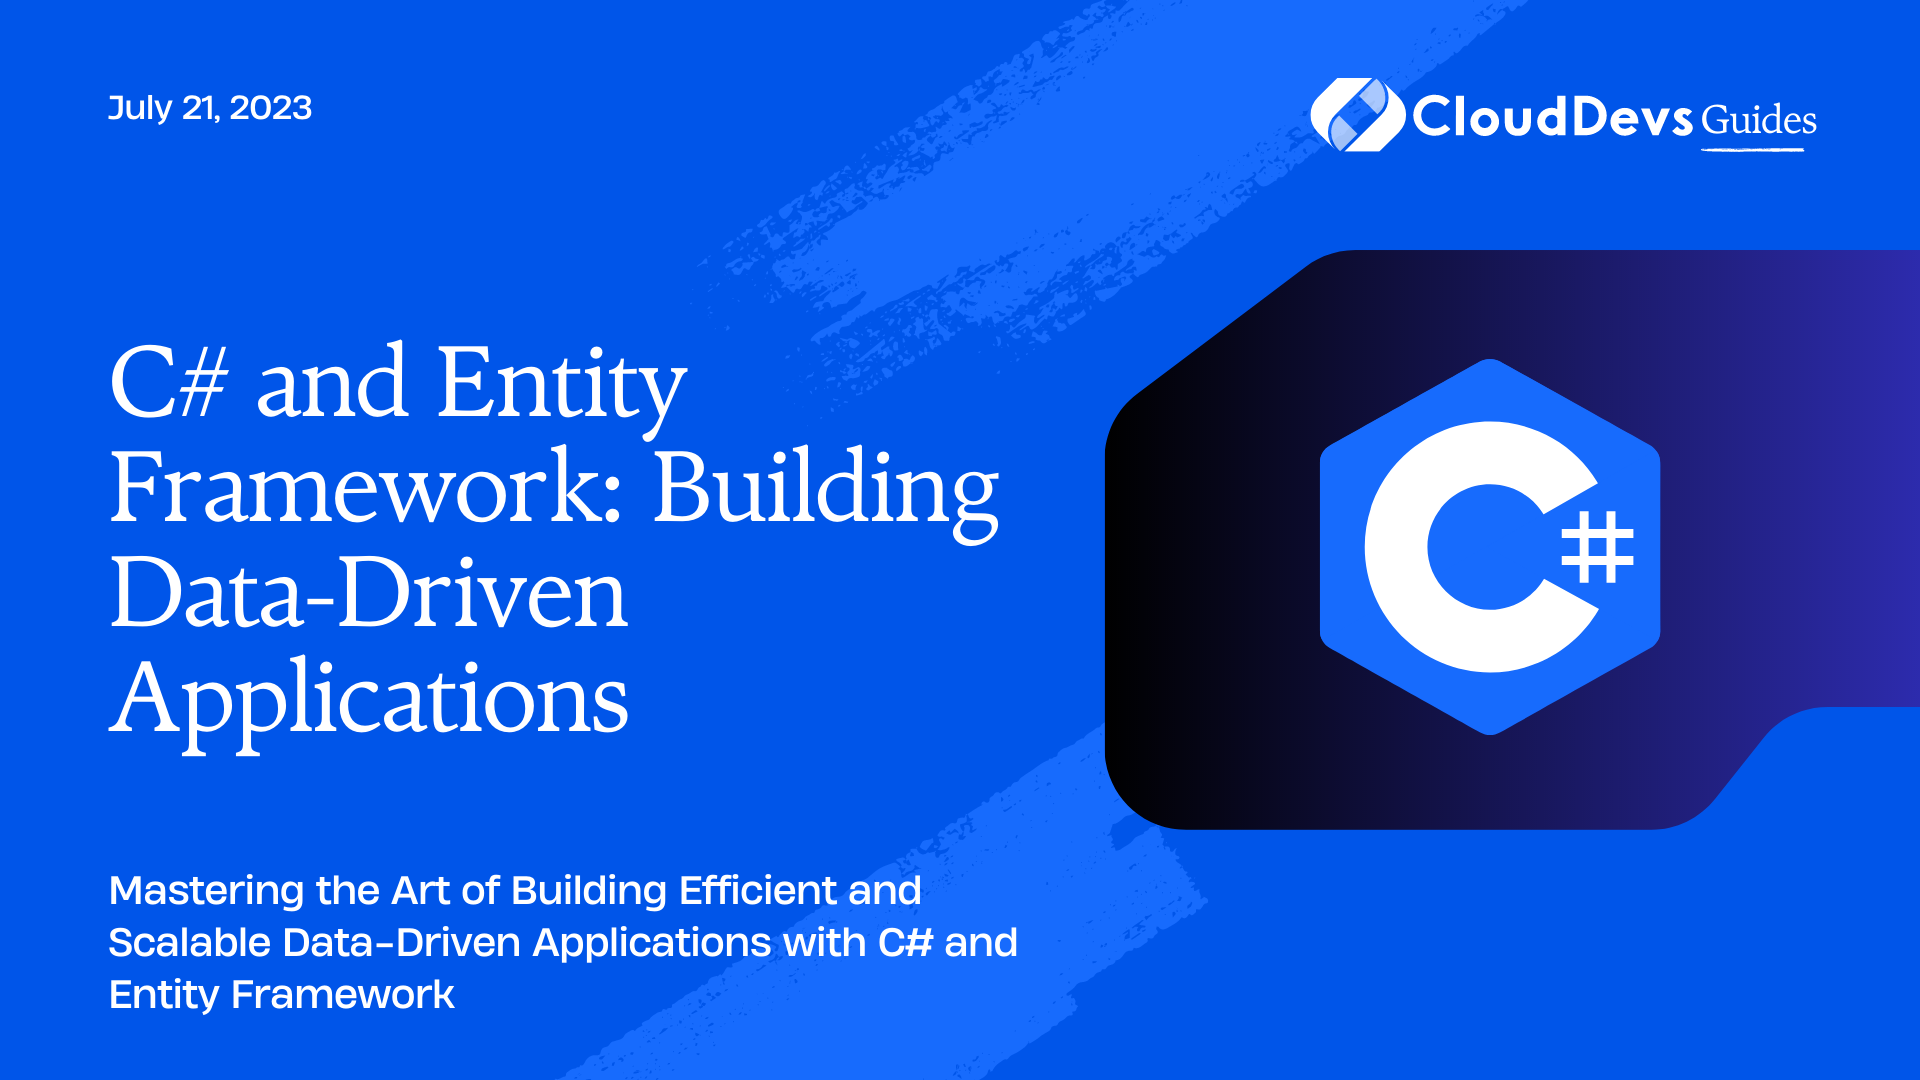 C# and Entity Framework: Building Data-Driven Applications